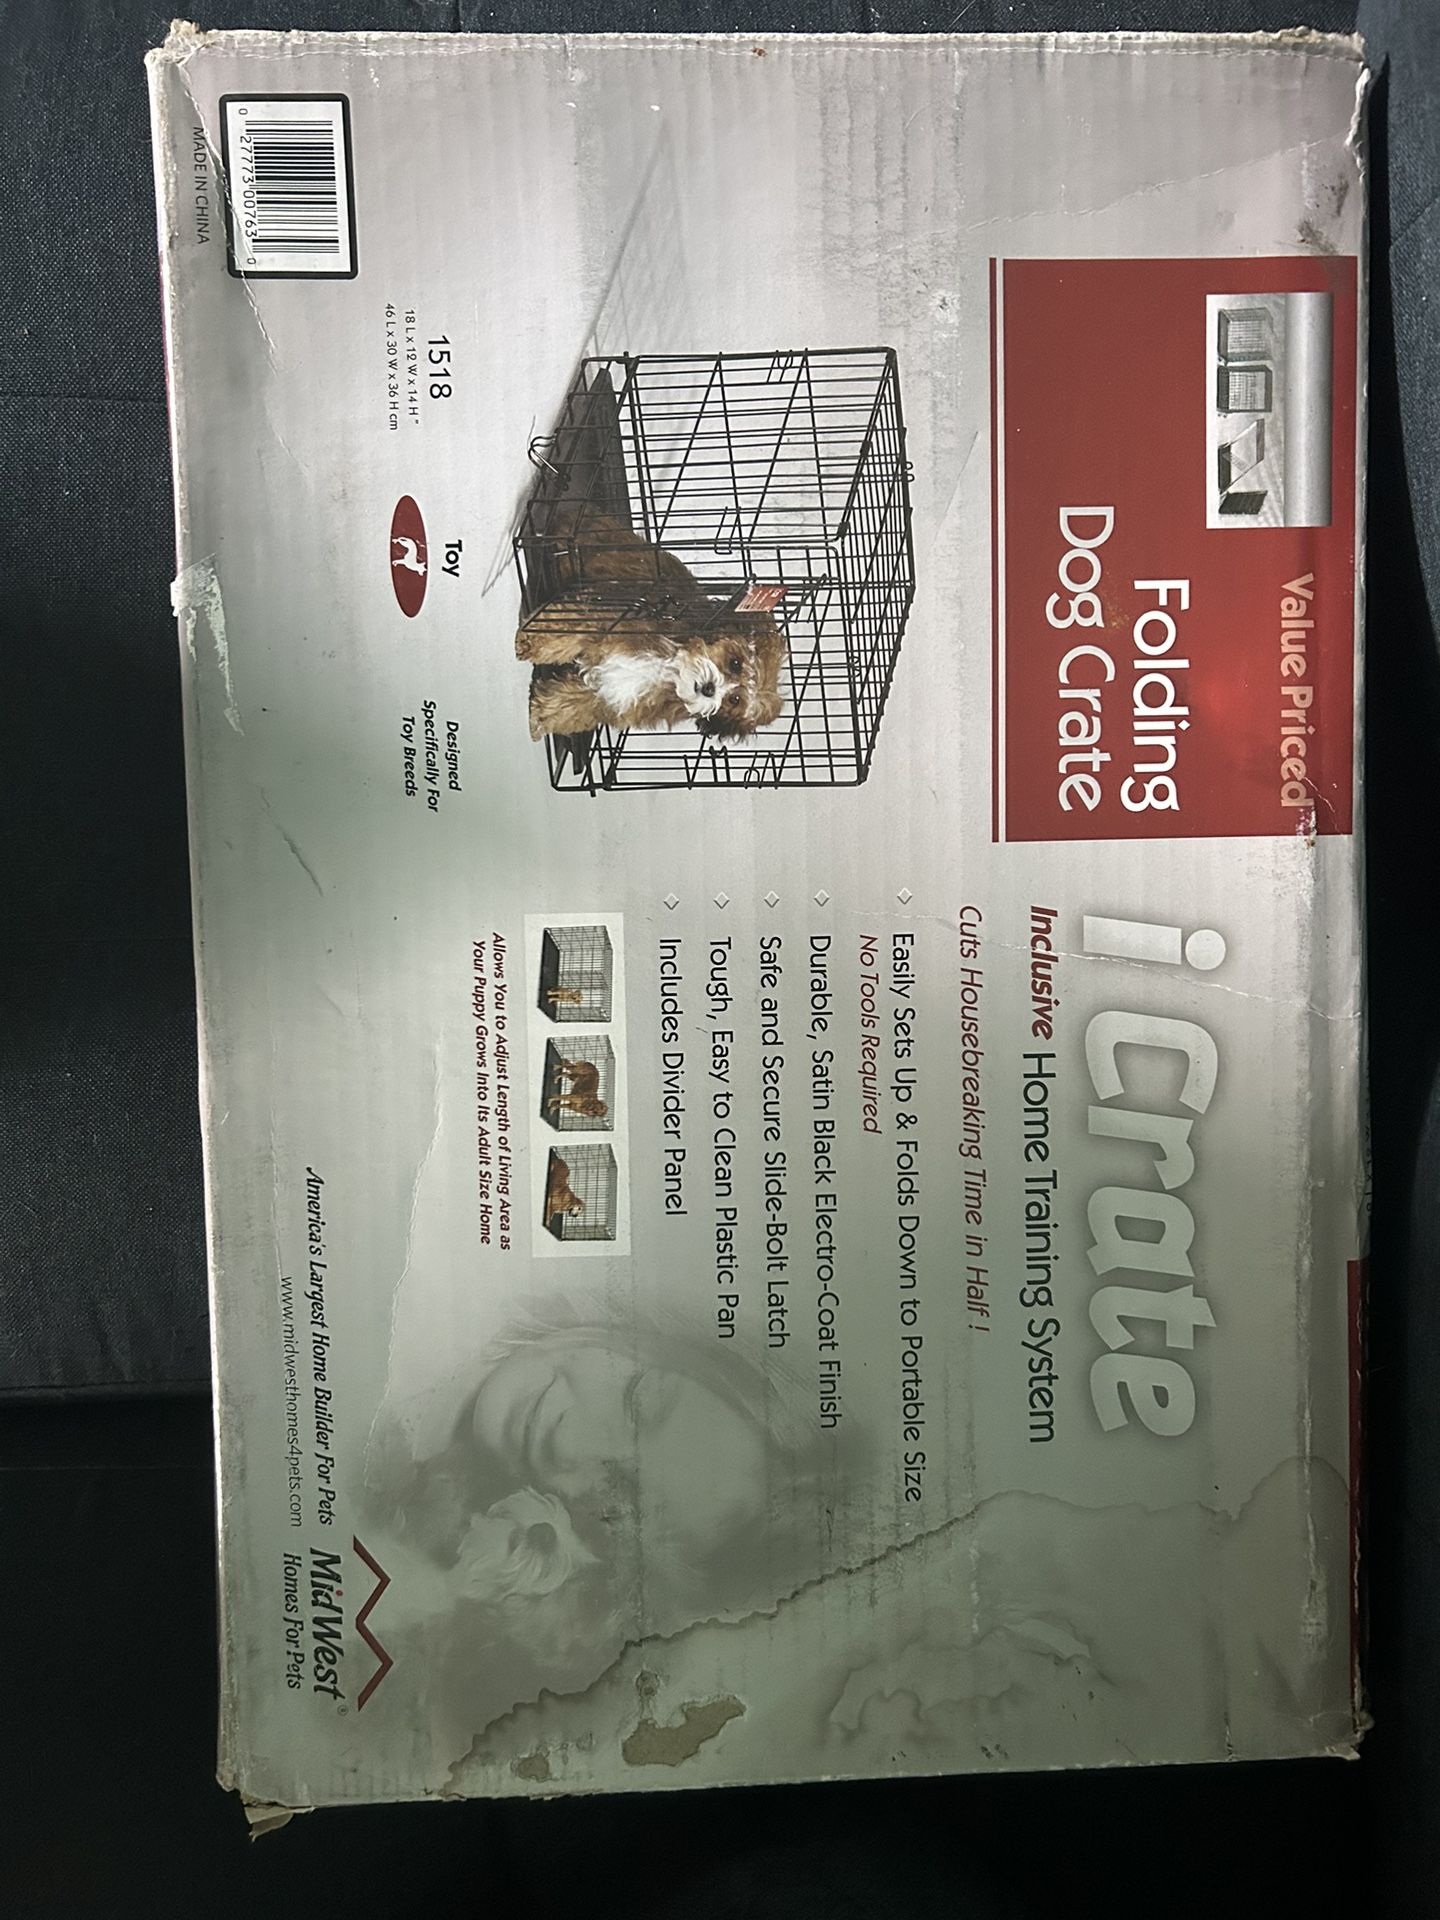 ICrate Dog crate